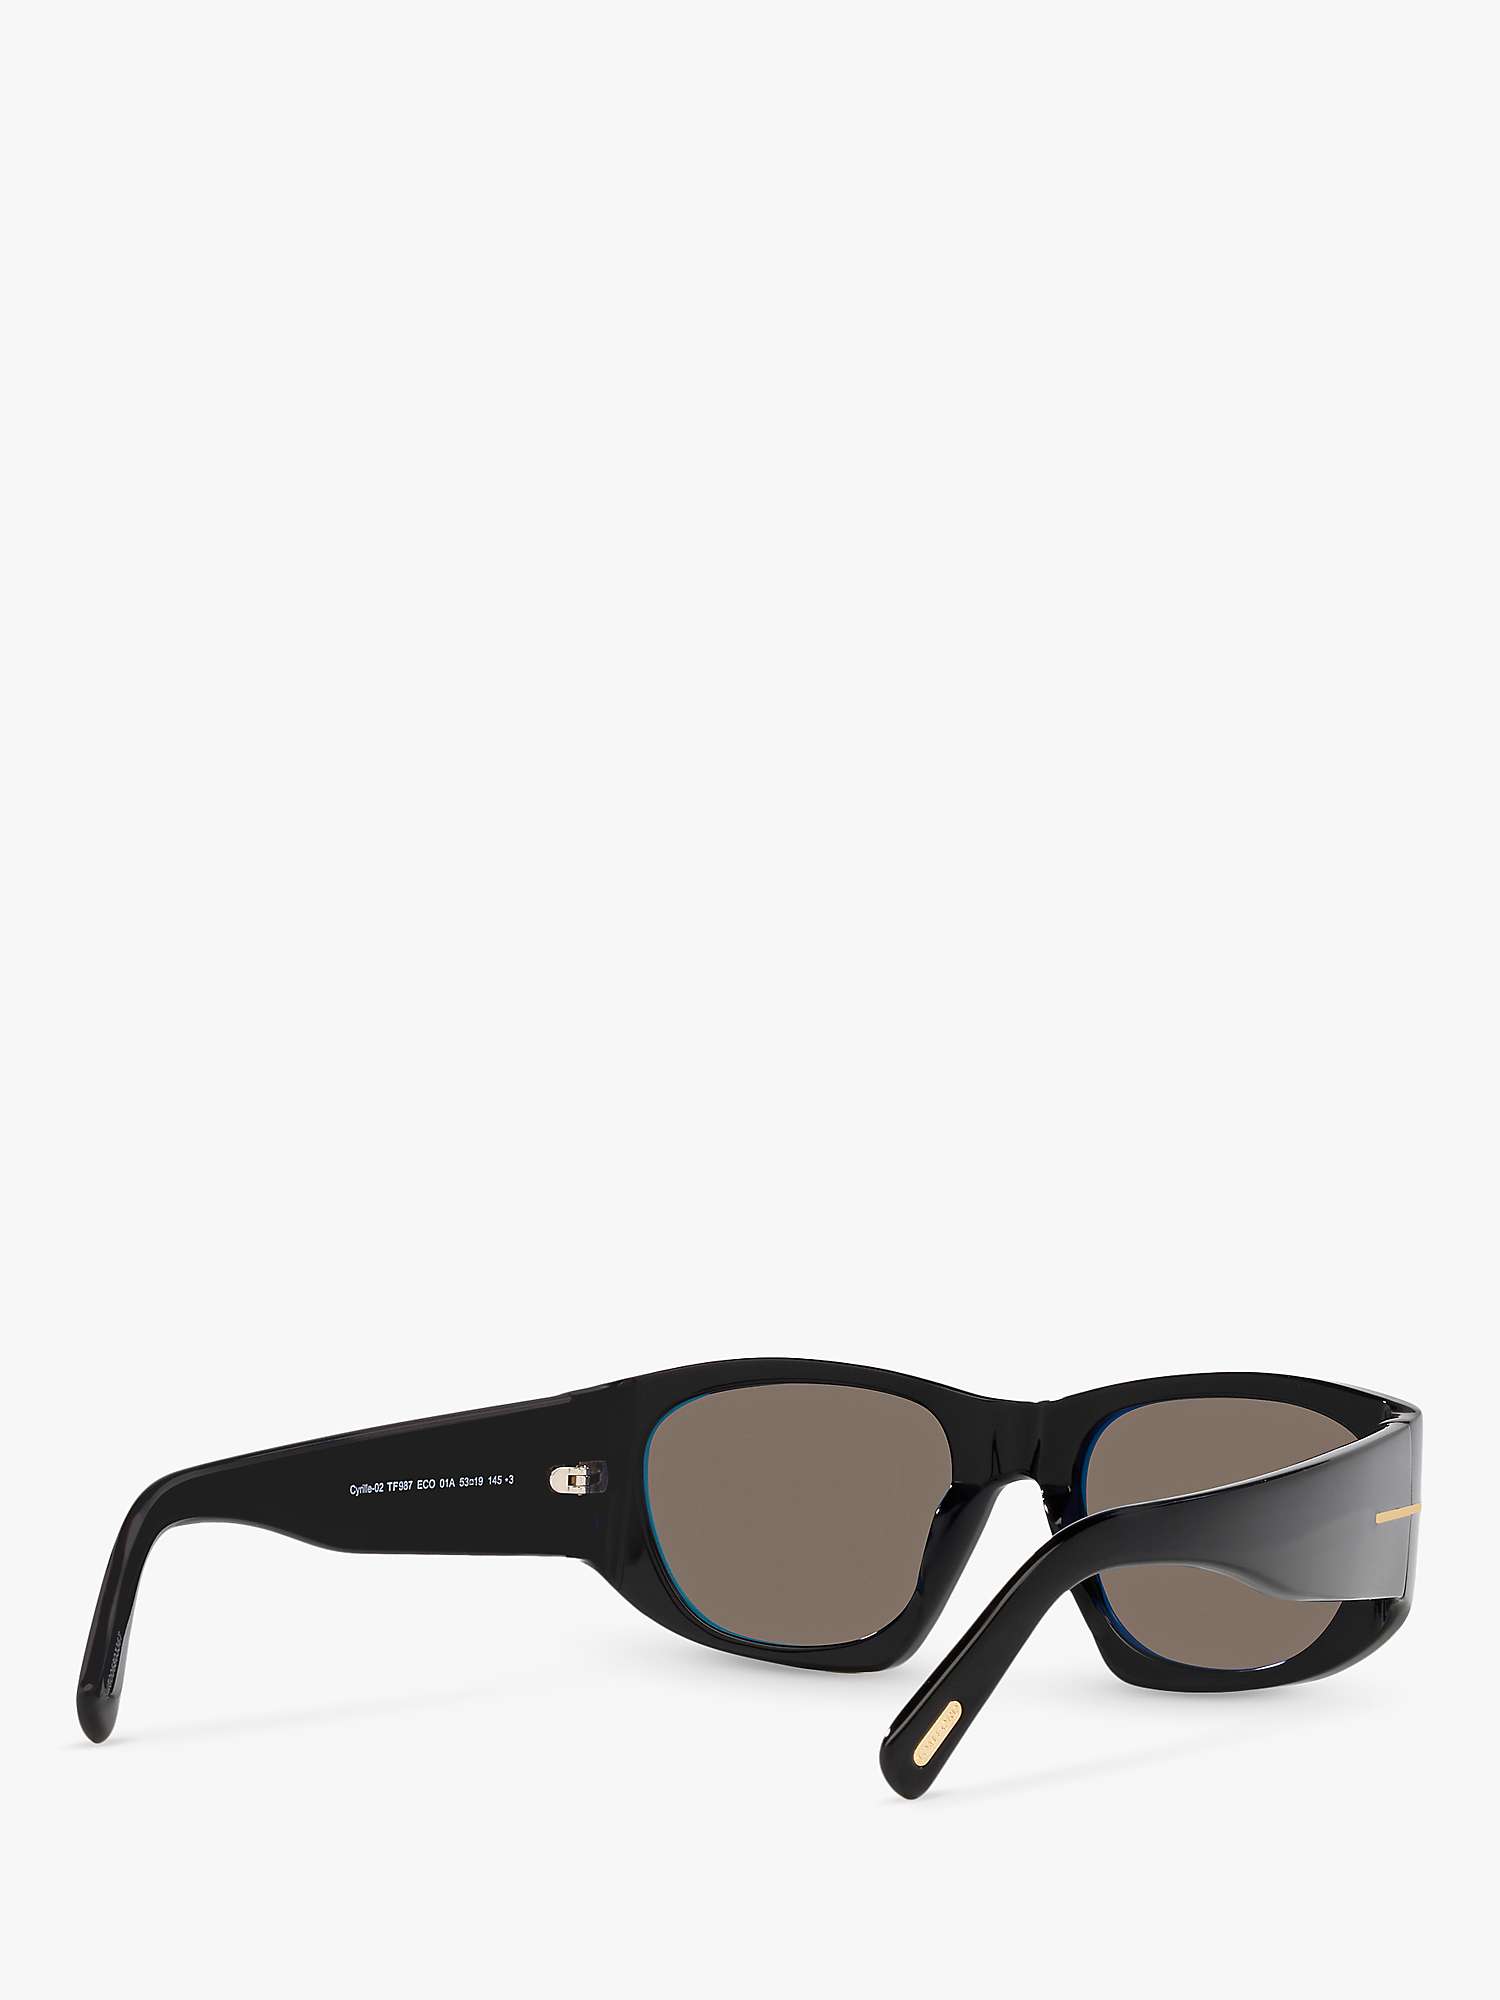 Buy TOM FORD FT0987 Unisex Cyrille Square Sunglasses Online at johnlewis.com